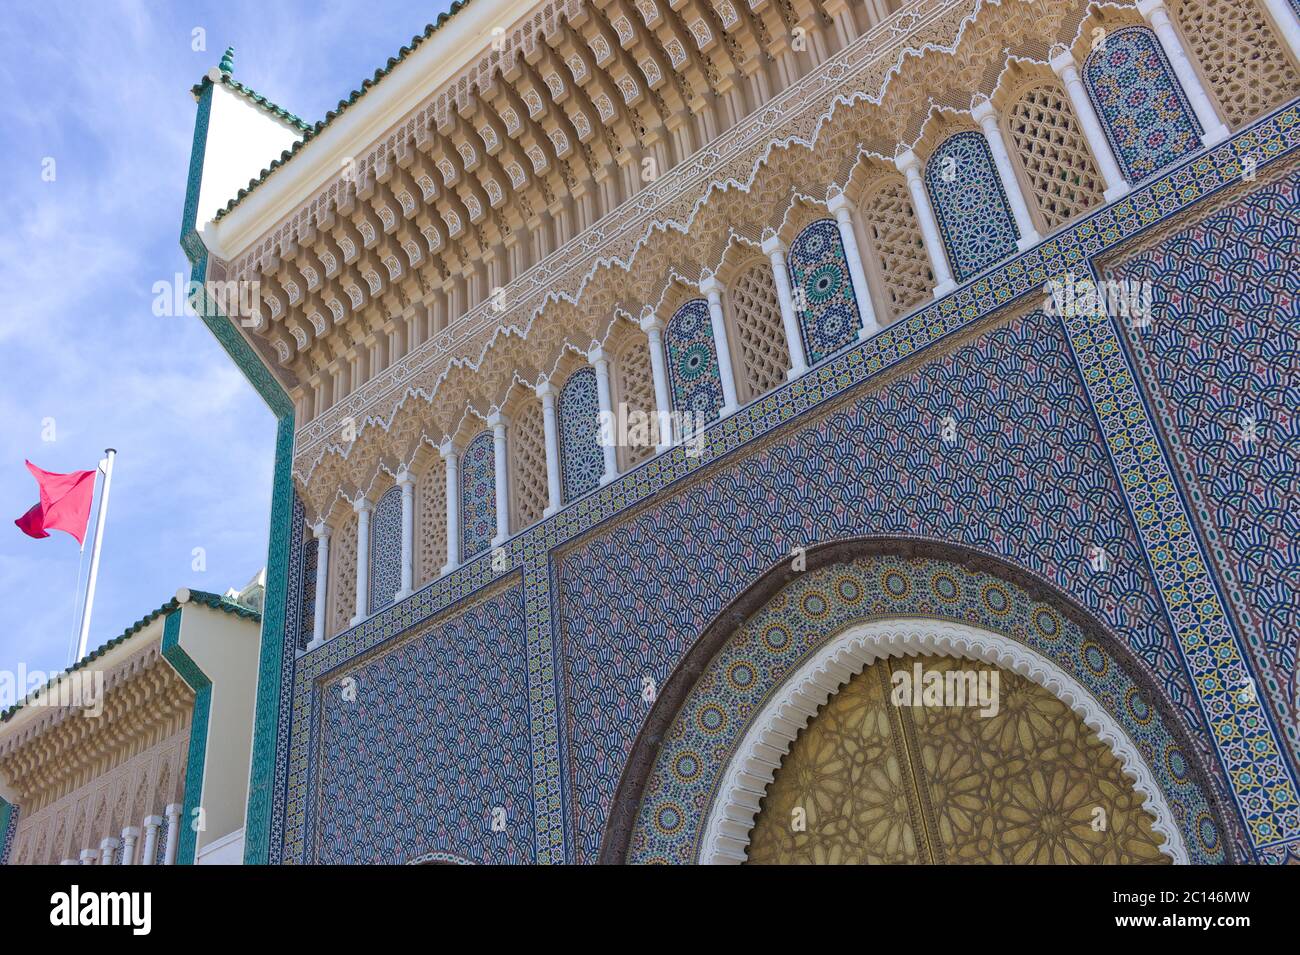 Facade of the Dar el-Makhzen palace with famous golden doors in Fes, Morocco Stock Photo